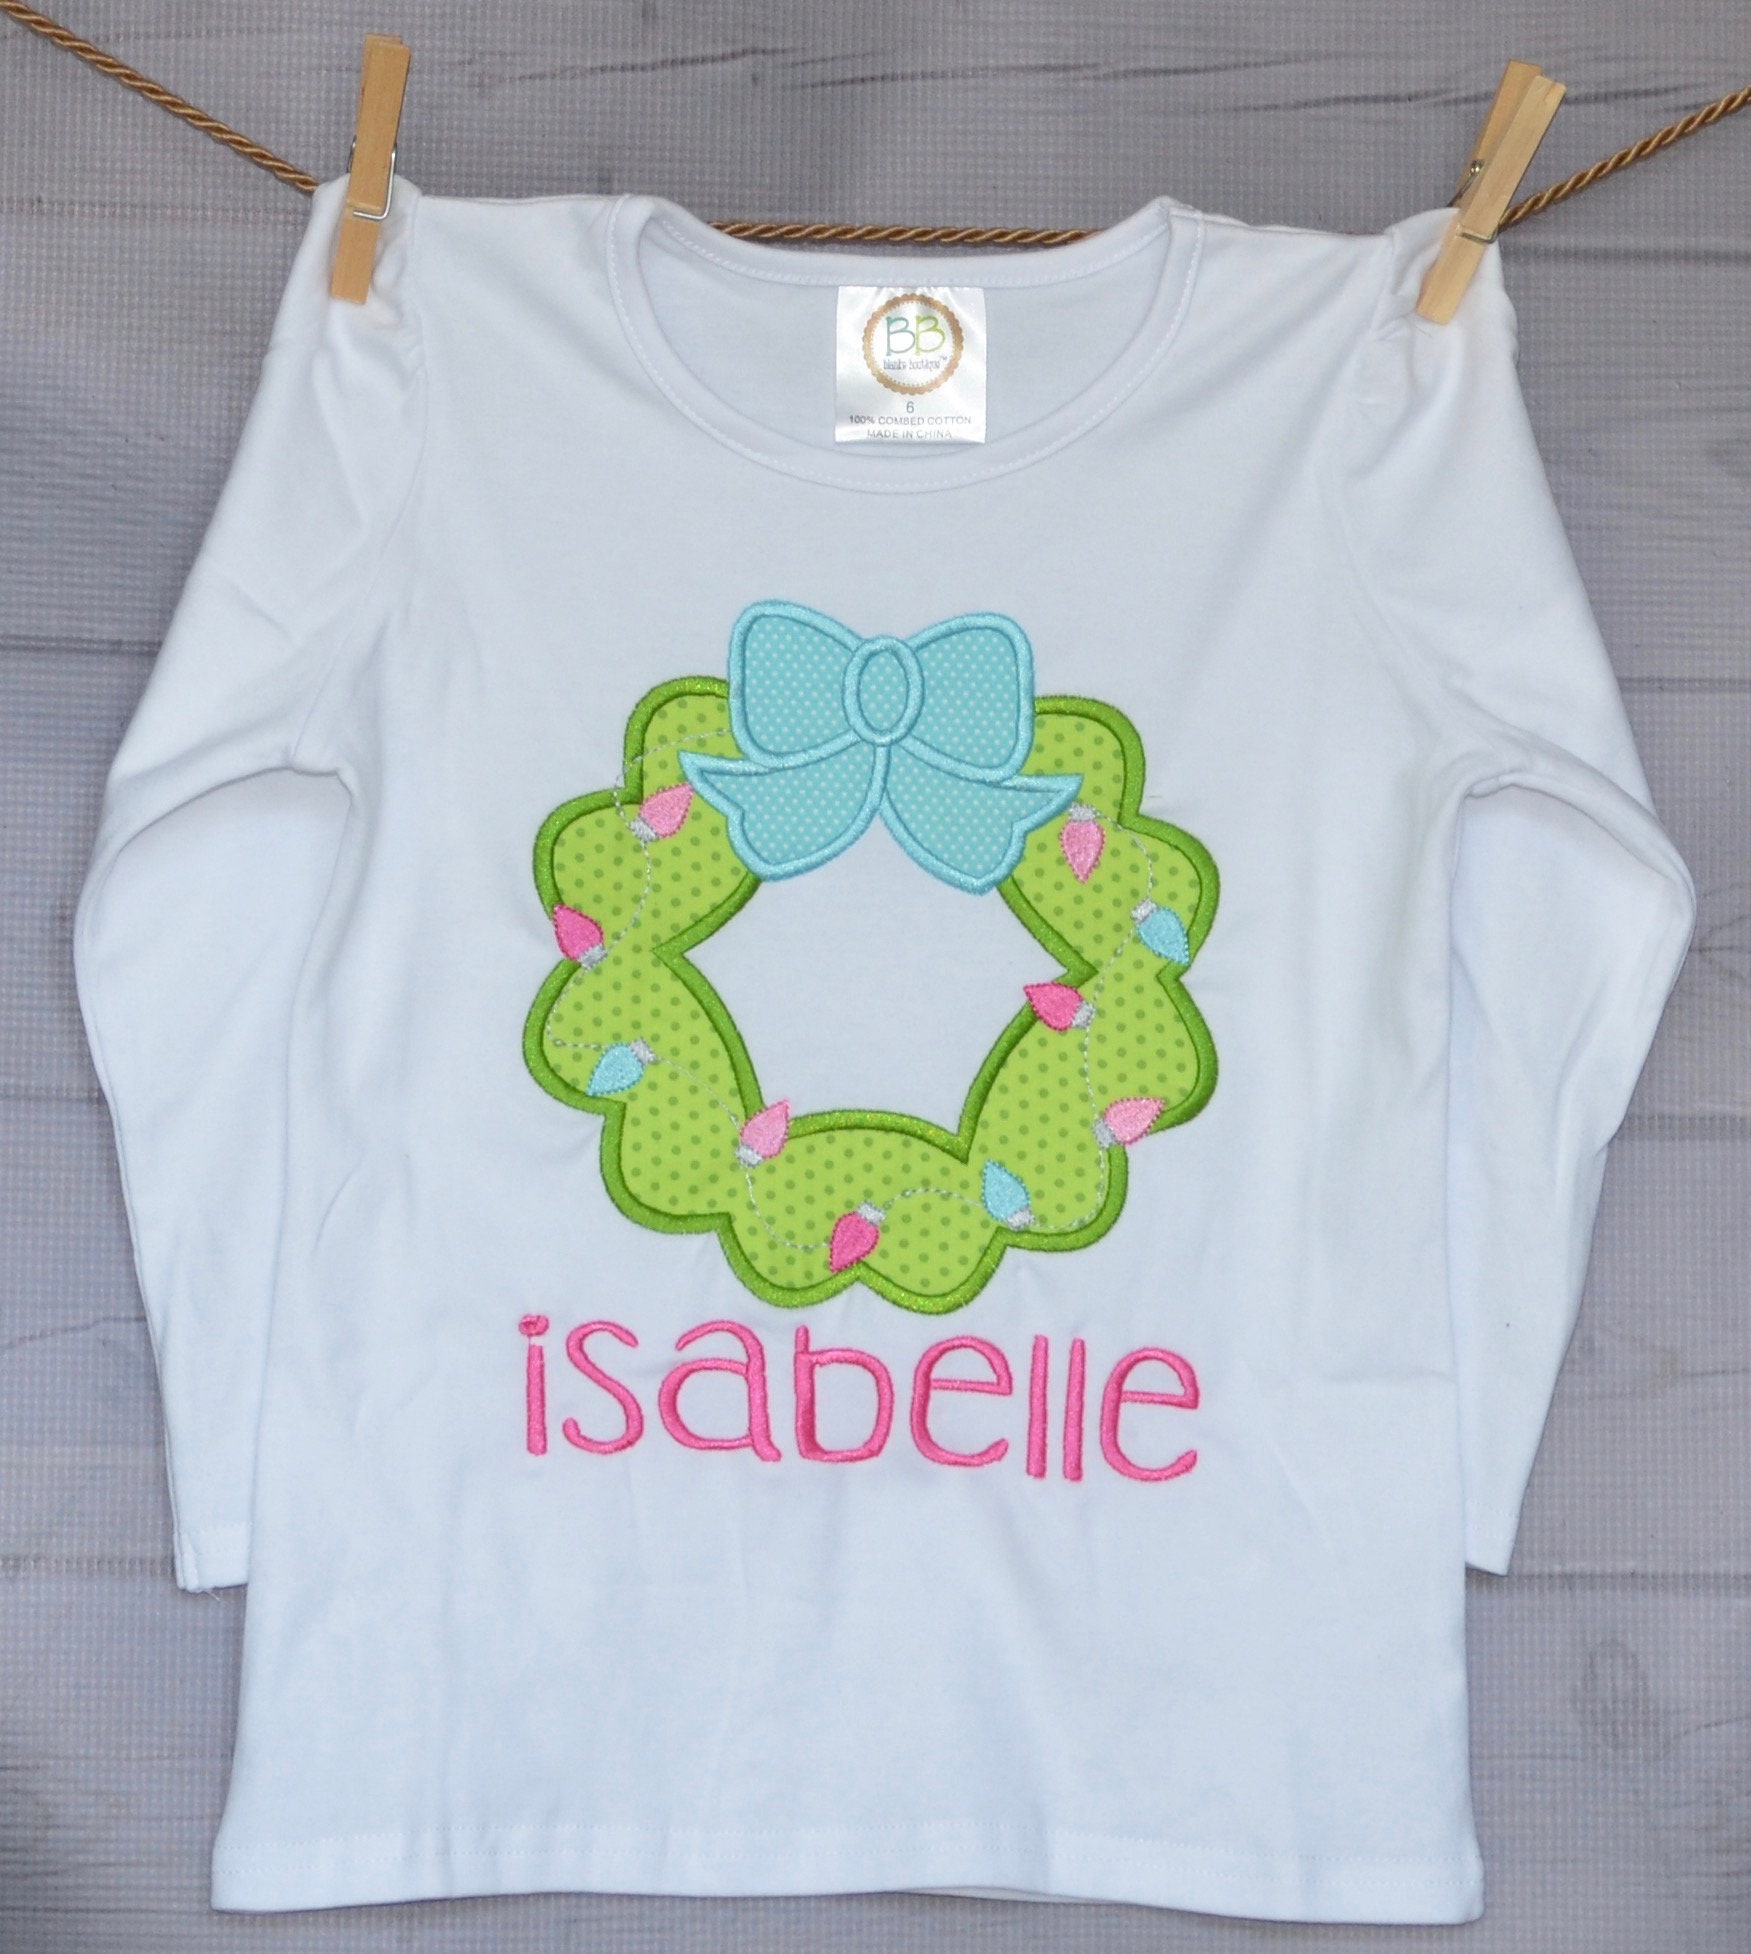 Personalized Christmas Wreath With Bow Applique Shirt Or Bodysuit Child, Baby Adult